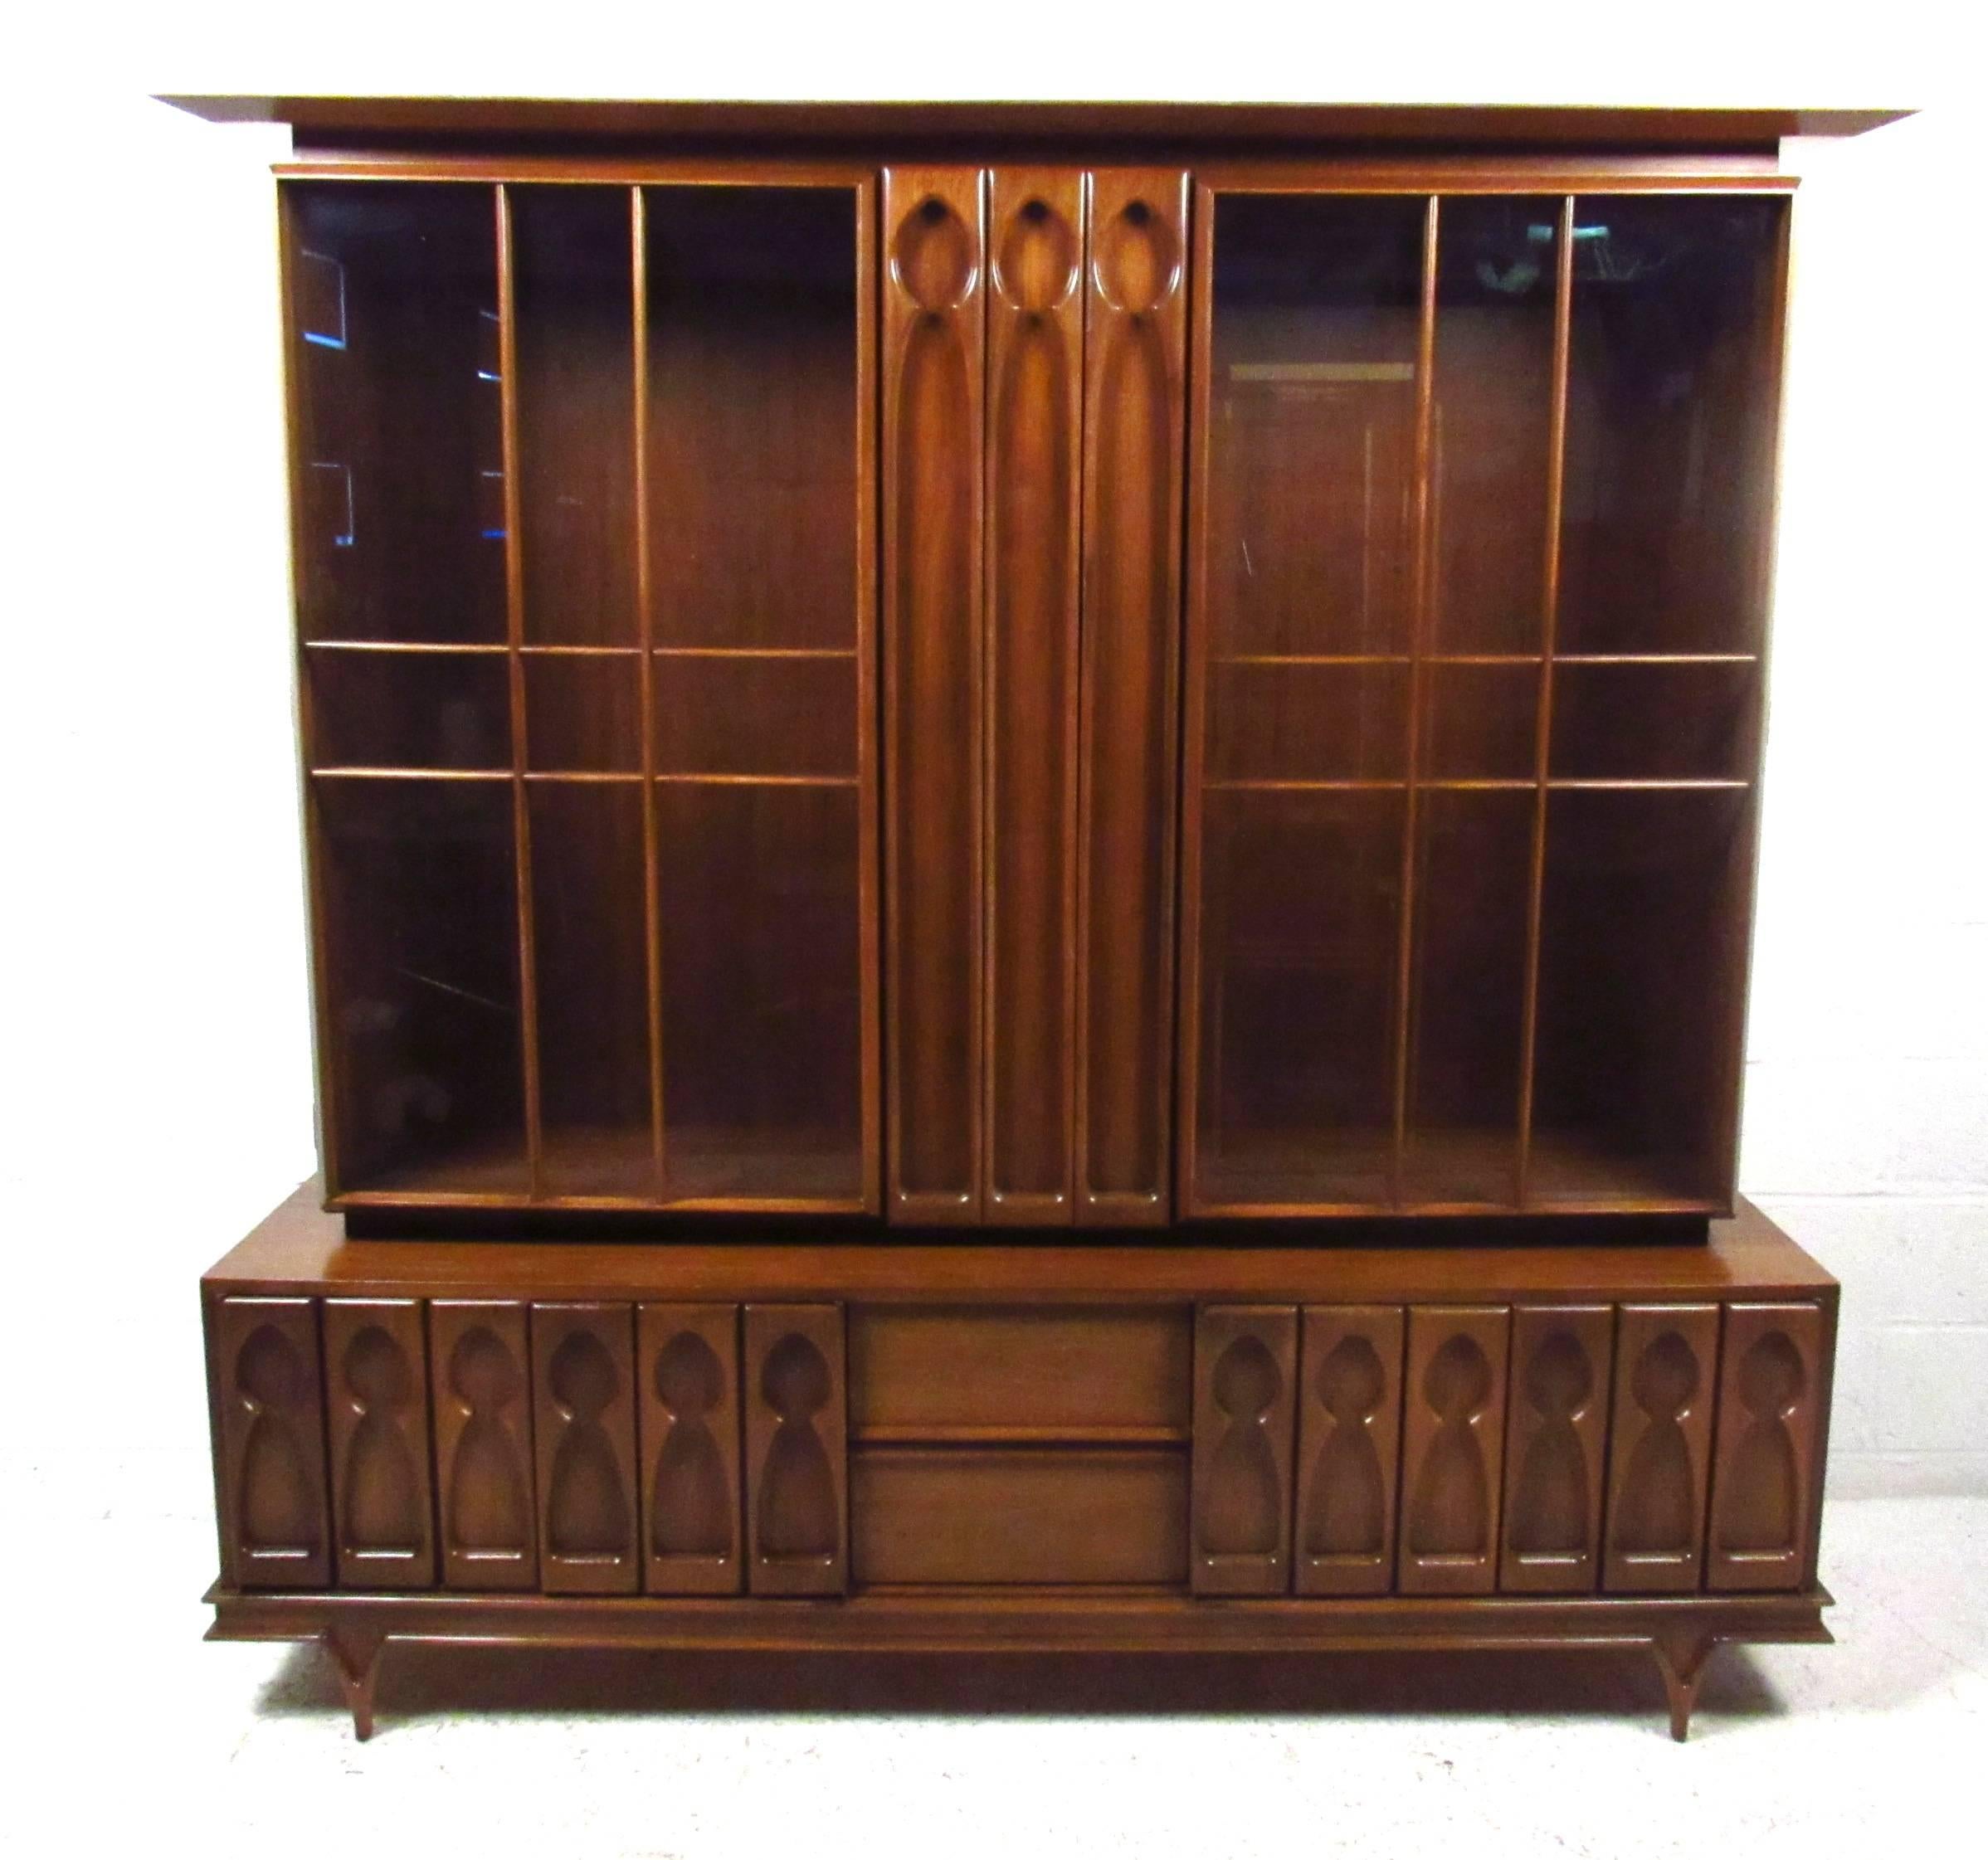 Beautifully detailed two-piece walnut hutch/server with dramatic 